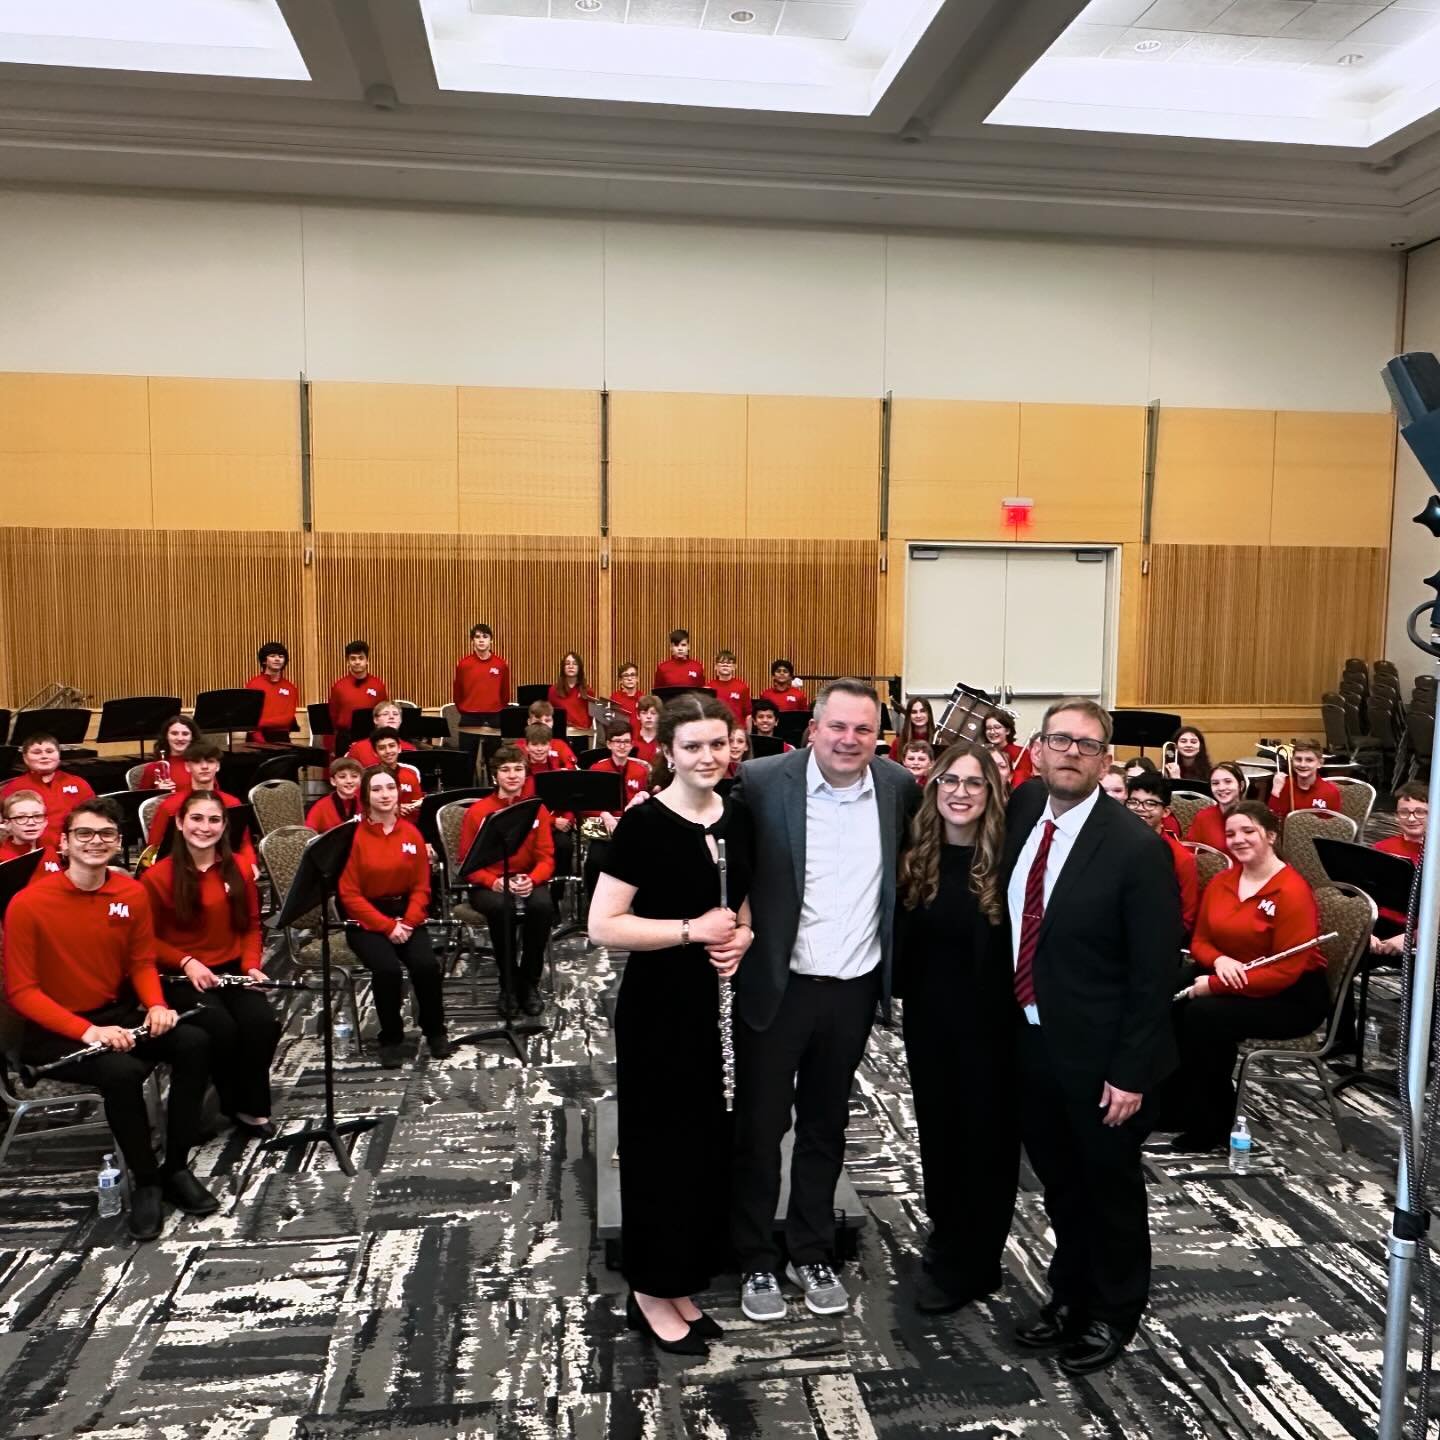 Yesterday was a great first performance of my Grade 2 + flute soloist work titled &ldquo;Moonburst.&rdquo; @lauren.radeschi and the @moonareaband Middle School Wind Ensemble led this consortium to this premiere at their PMEA performance! 

Looking fo